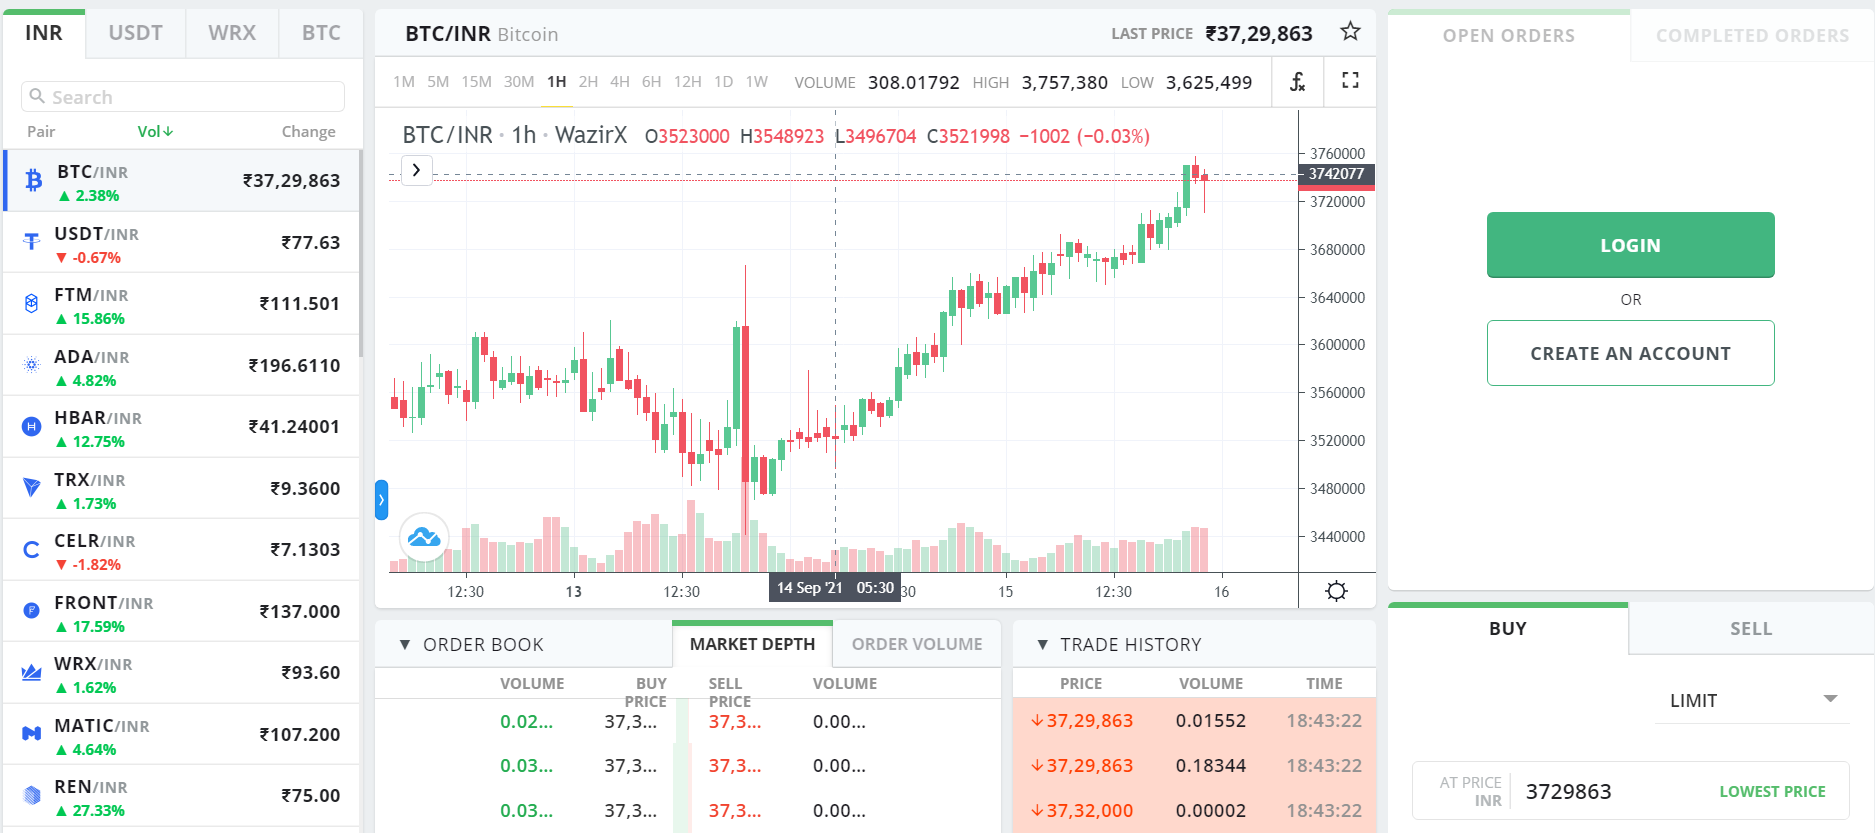 wazirx live chart and graph explained in INR